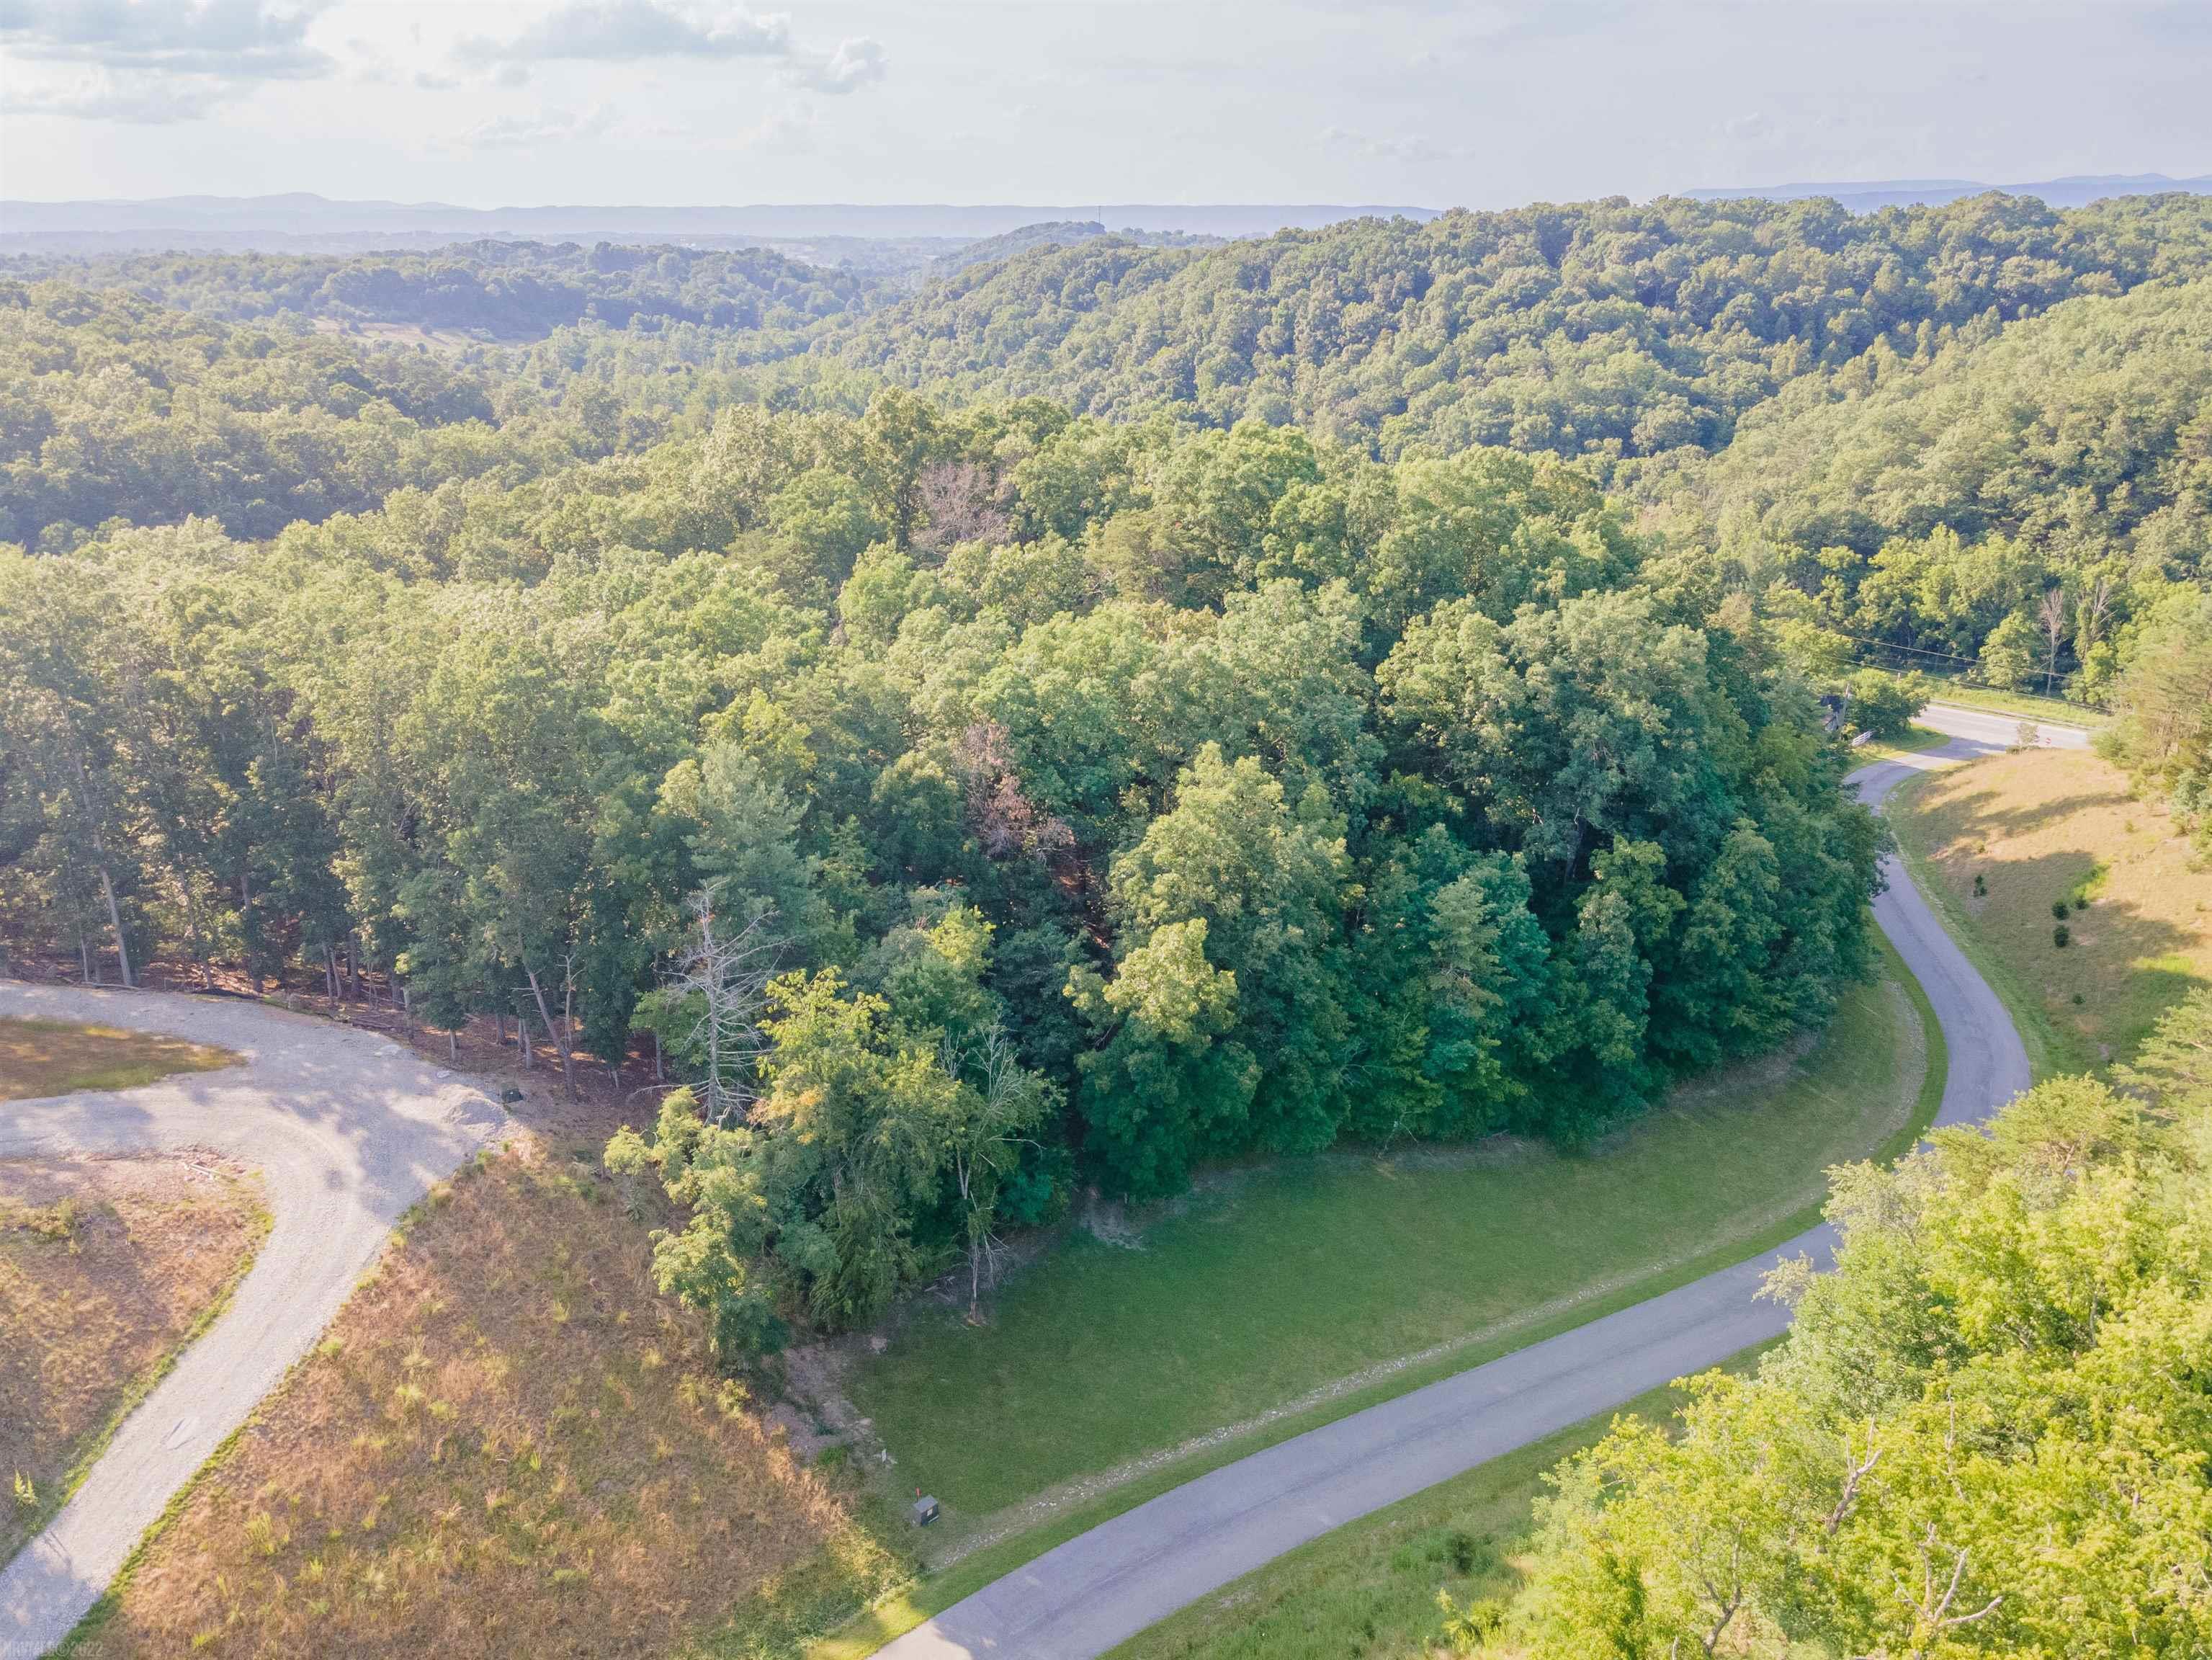 Desirable 3.2 acre building lot on the border of Radford City limits! Located in Auburn School District and convenient to Radford University, New River Valley Medical Center, and I-81 interstate.